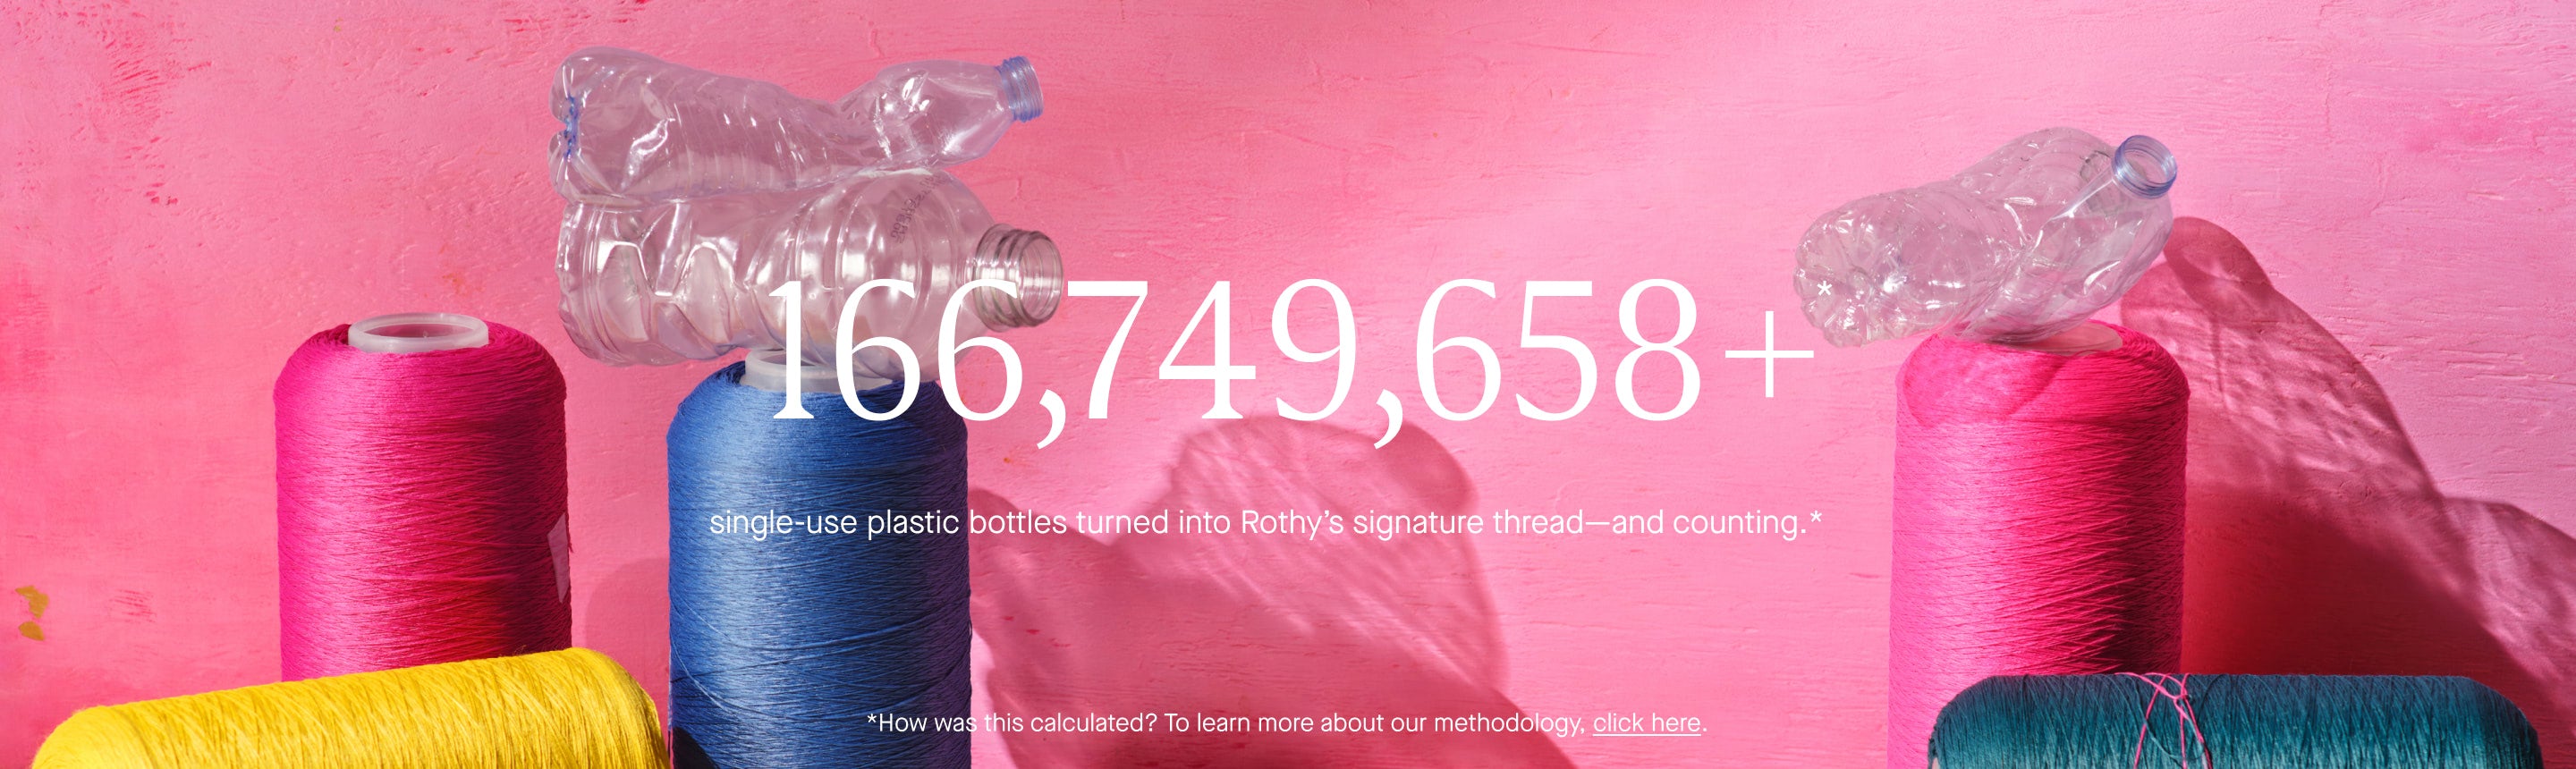 166,749,658+ single-use plastic bottles turned into Rothy's signature thread-and counting.*